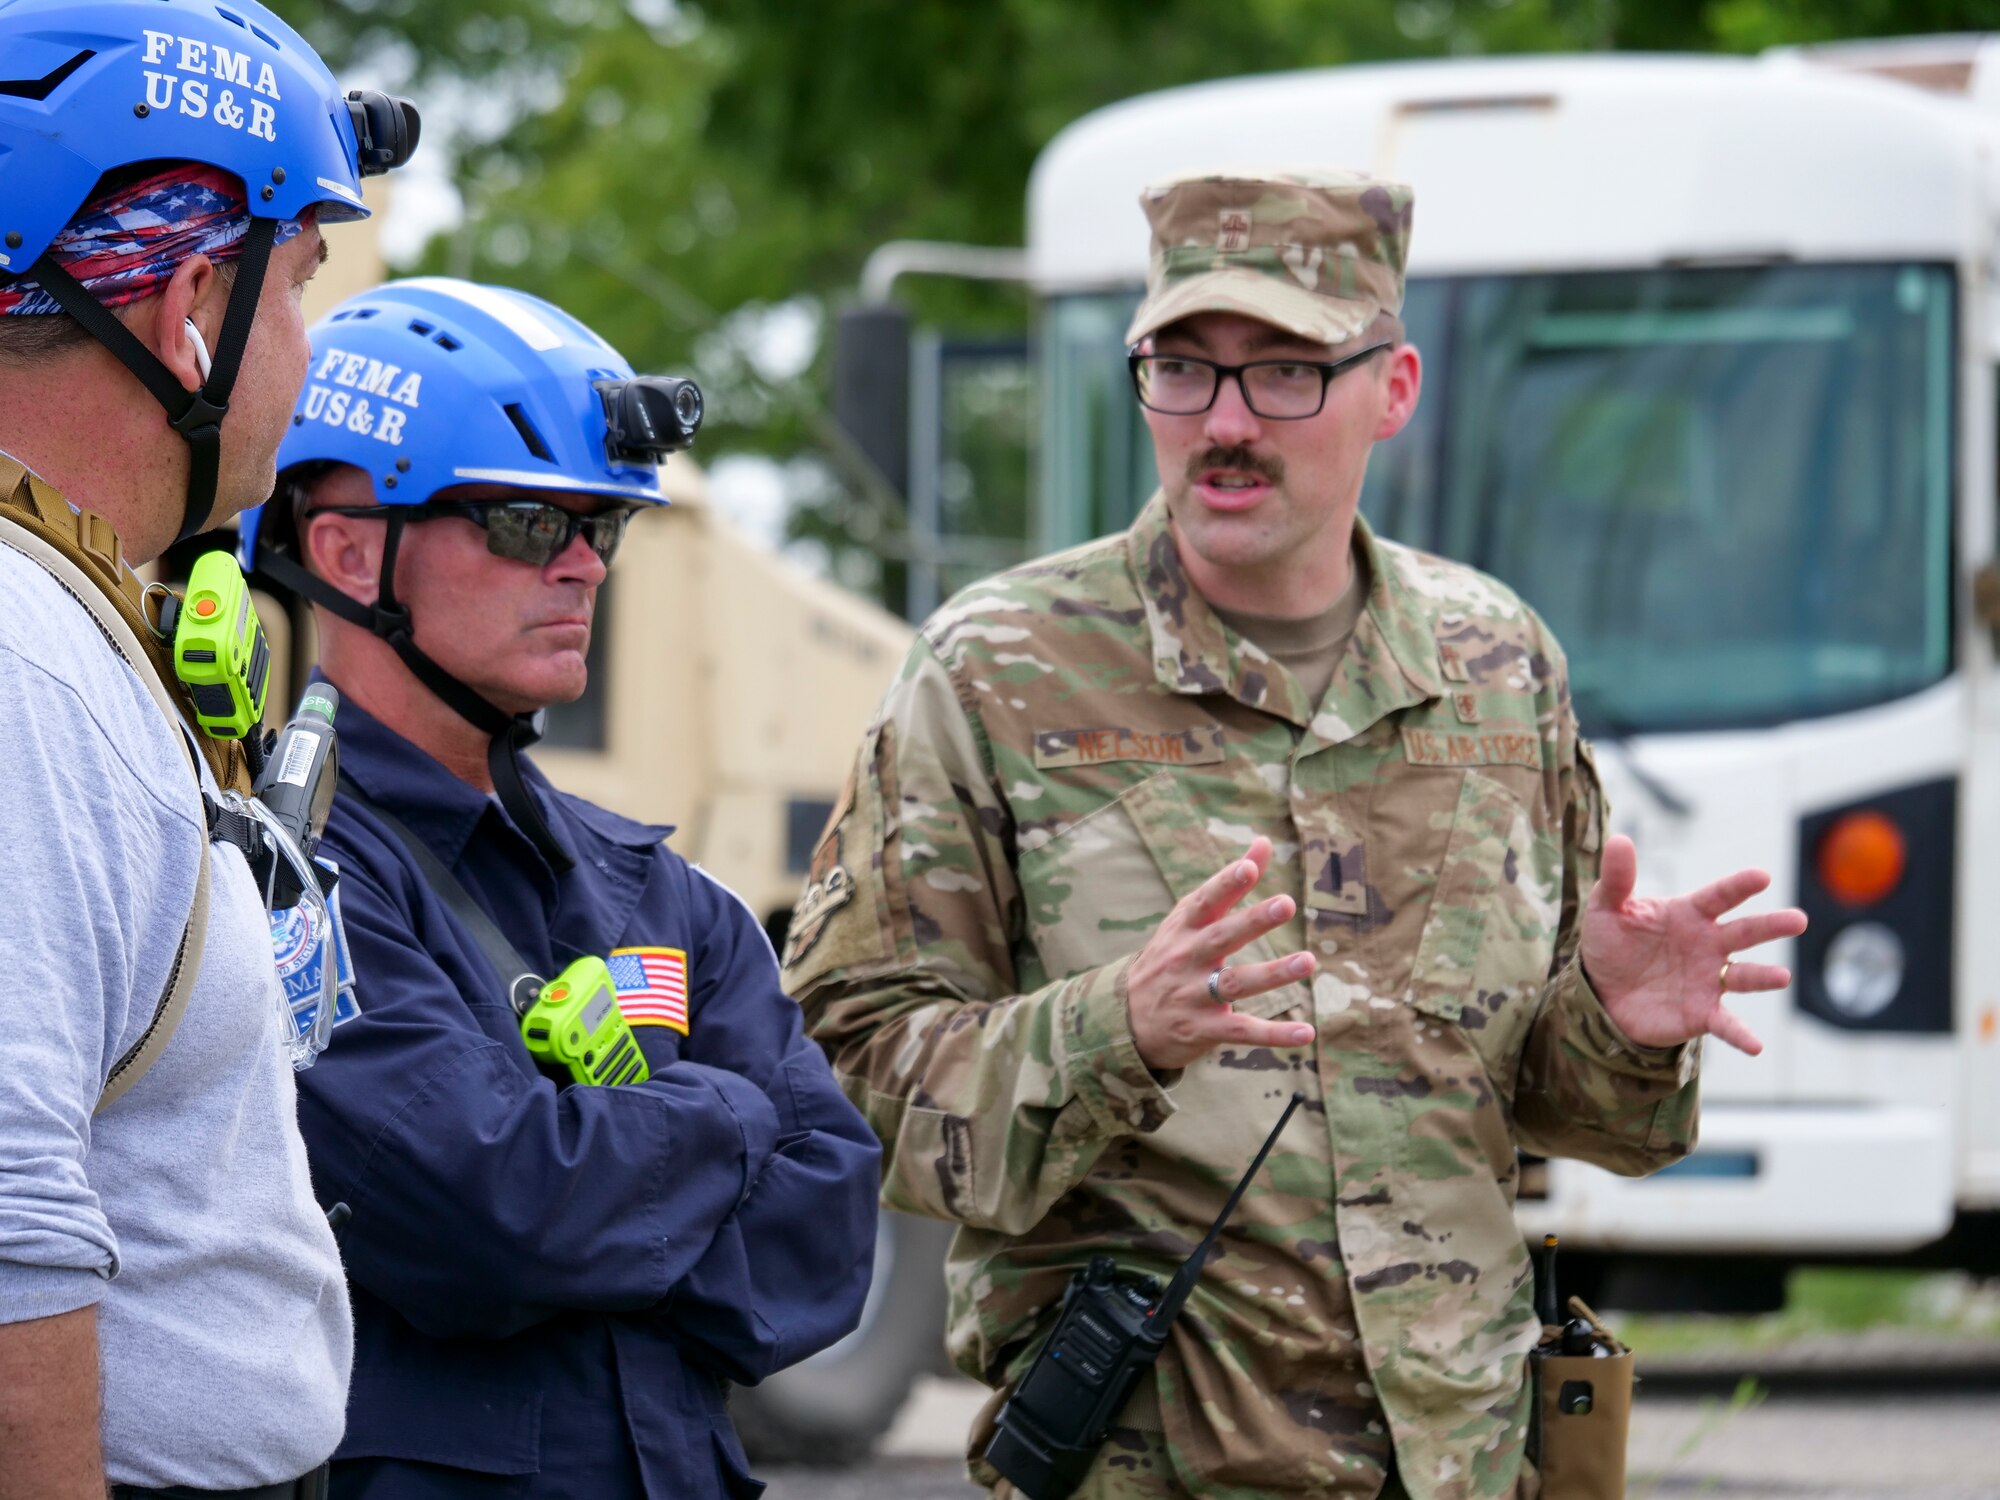 A member of the Indiana National Guard discusses mission plans with civilian counterparts during exercise Homeland Defender Aug. 14, 2021. More than 500 Soldiers, Airmen and civilian first responders participated in the scenario involving an earthquake and cyberattacks.